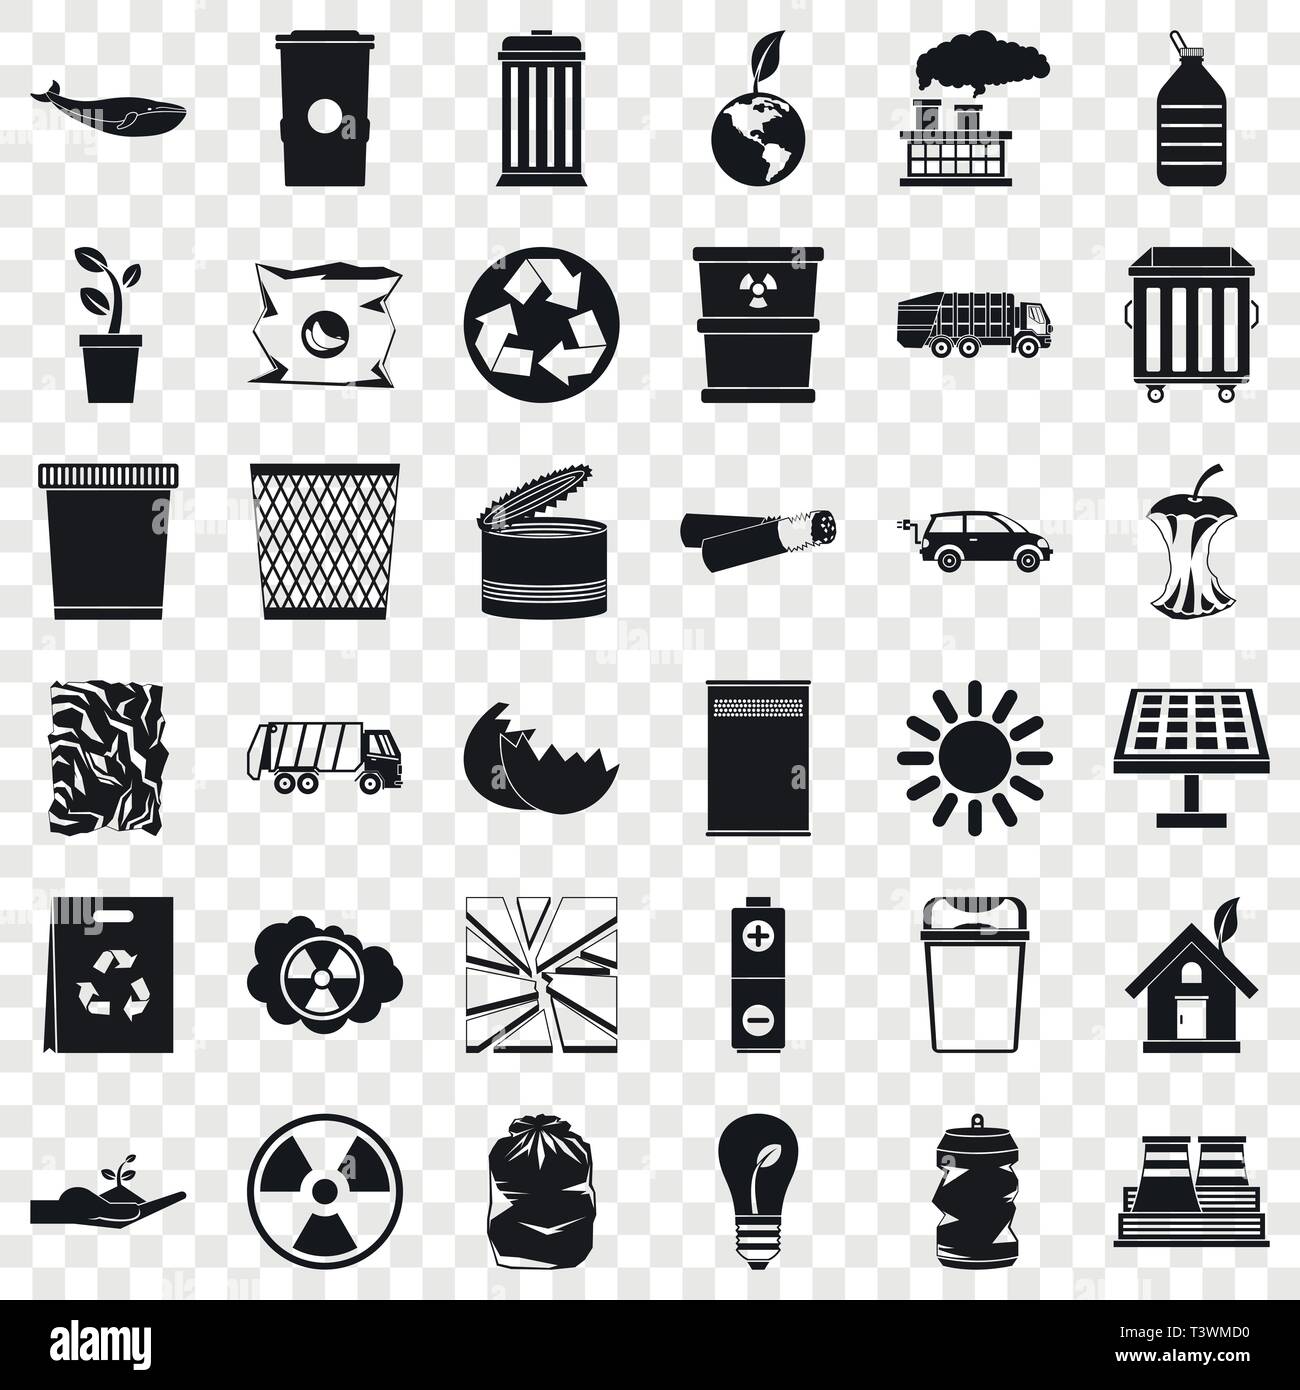 Ecology icons set, simple style Stock Vector